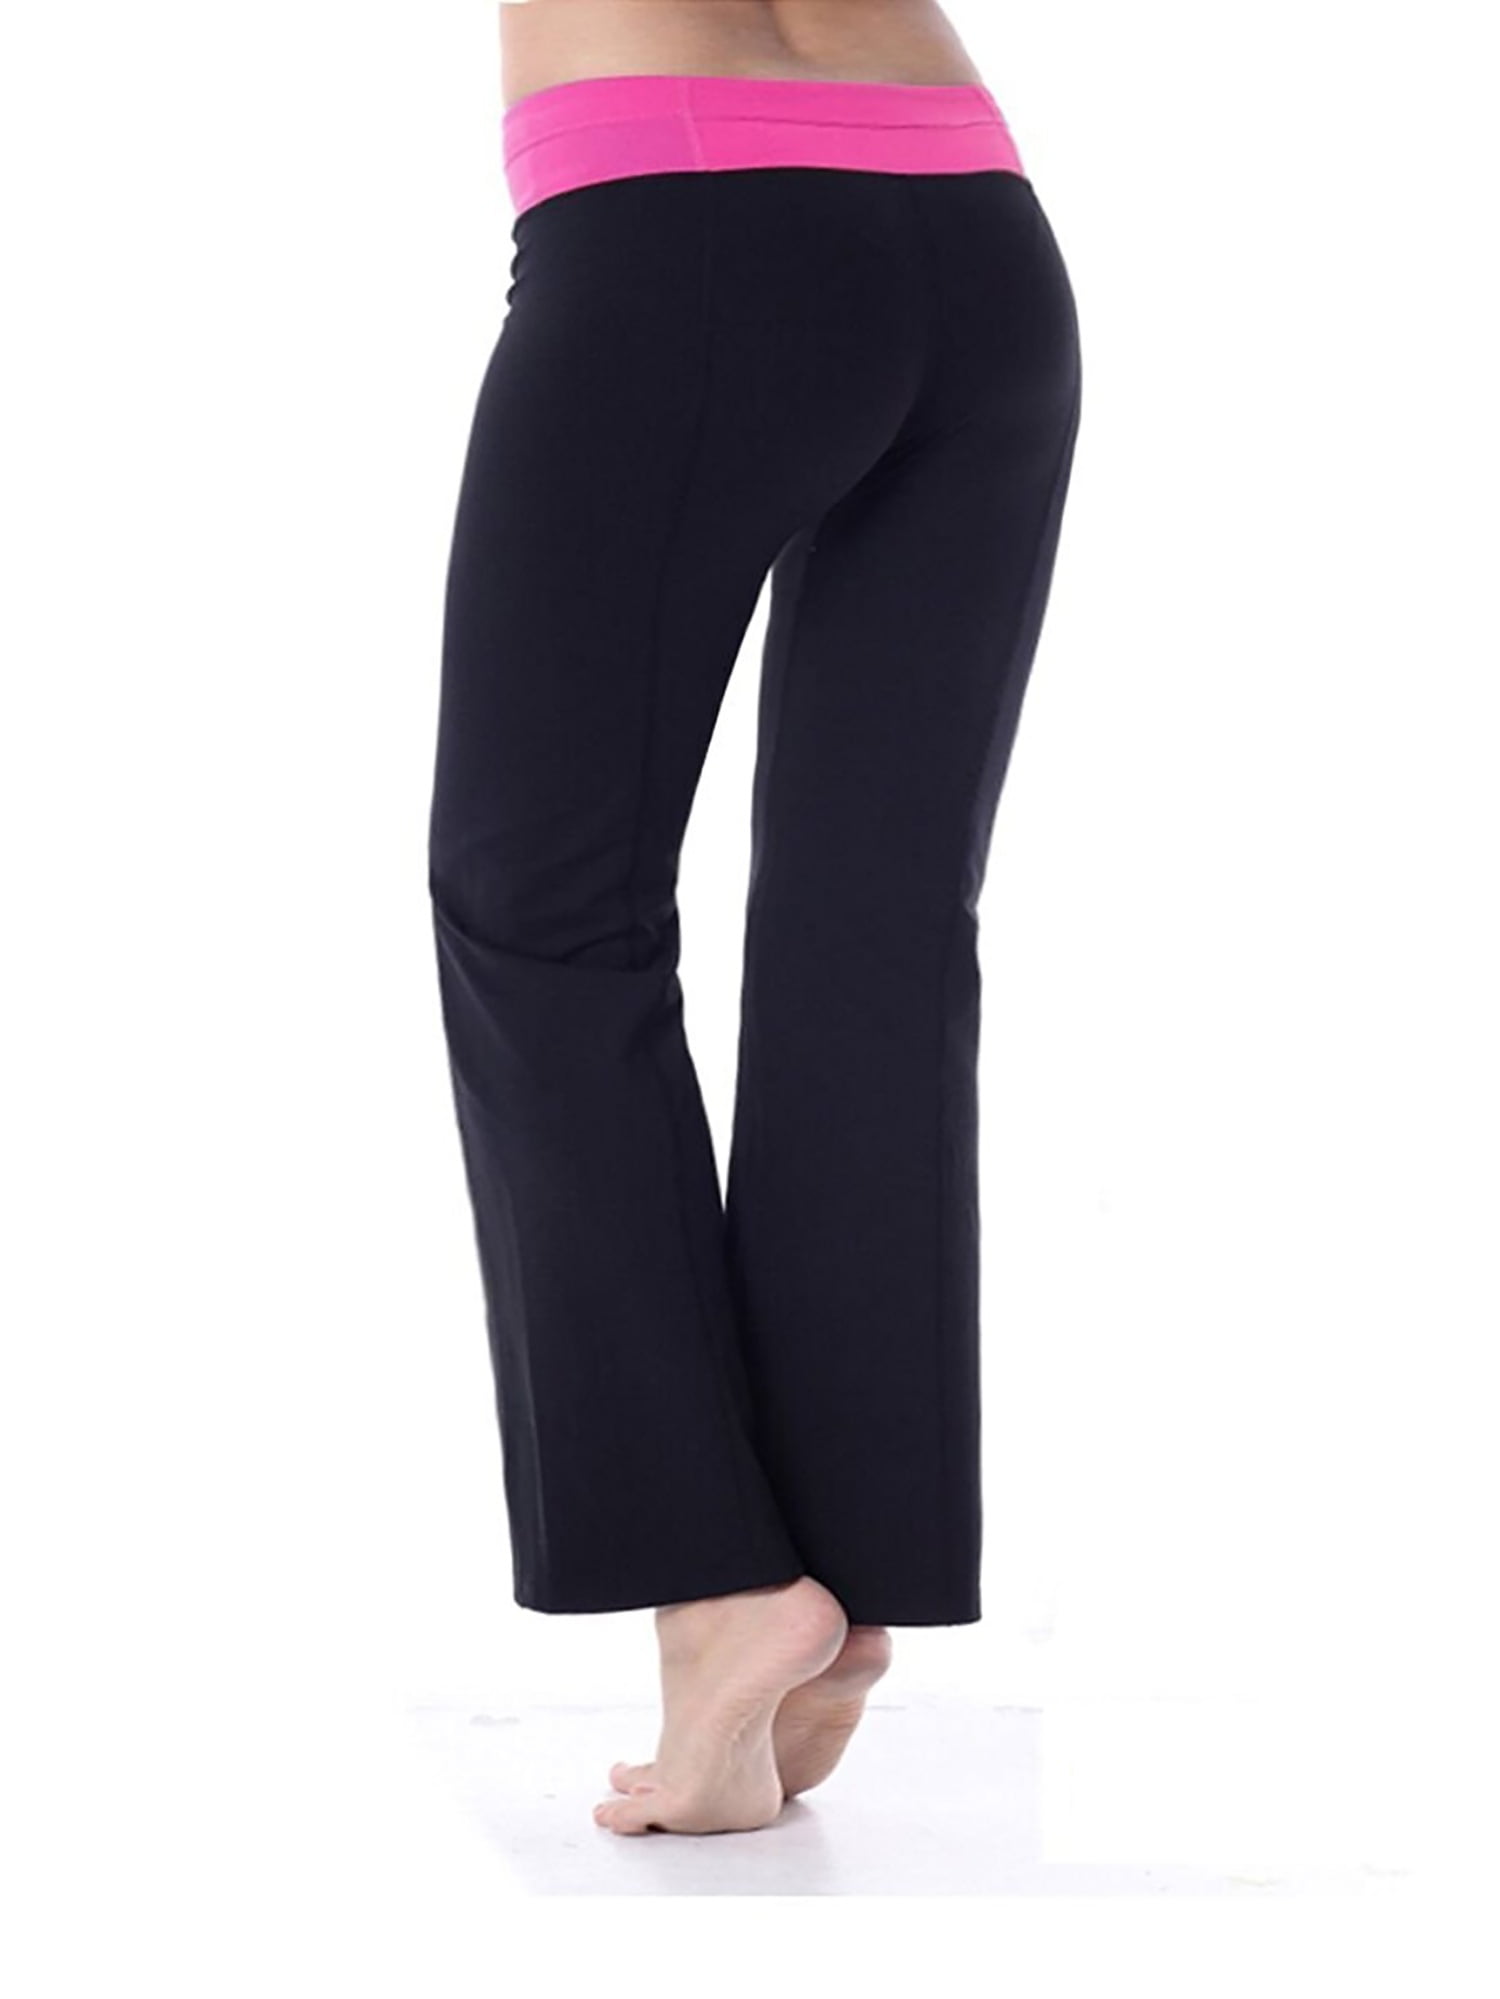 Best Boot Cut Yoga Pants | International Society of Precision Agriculture